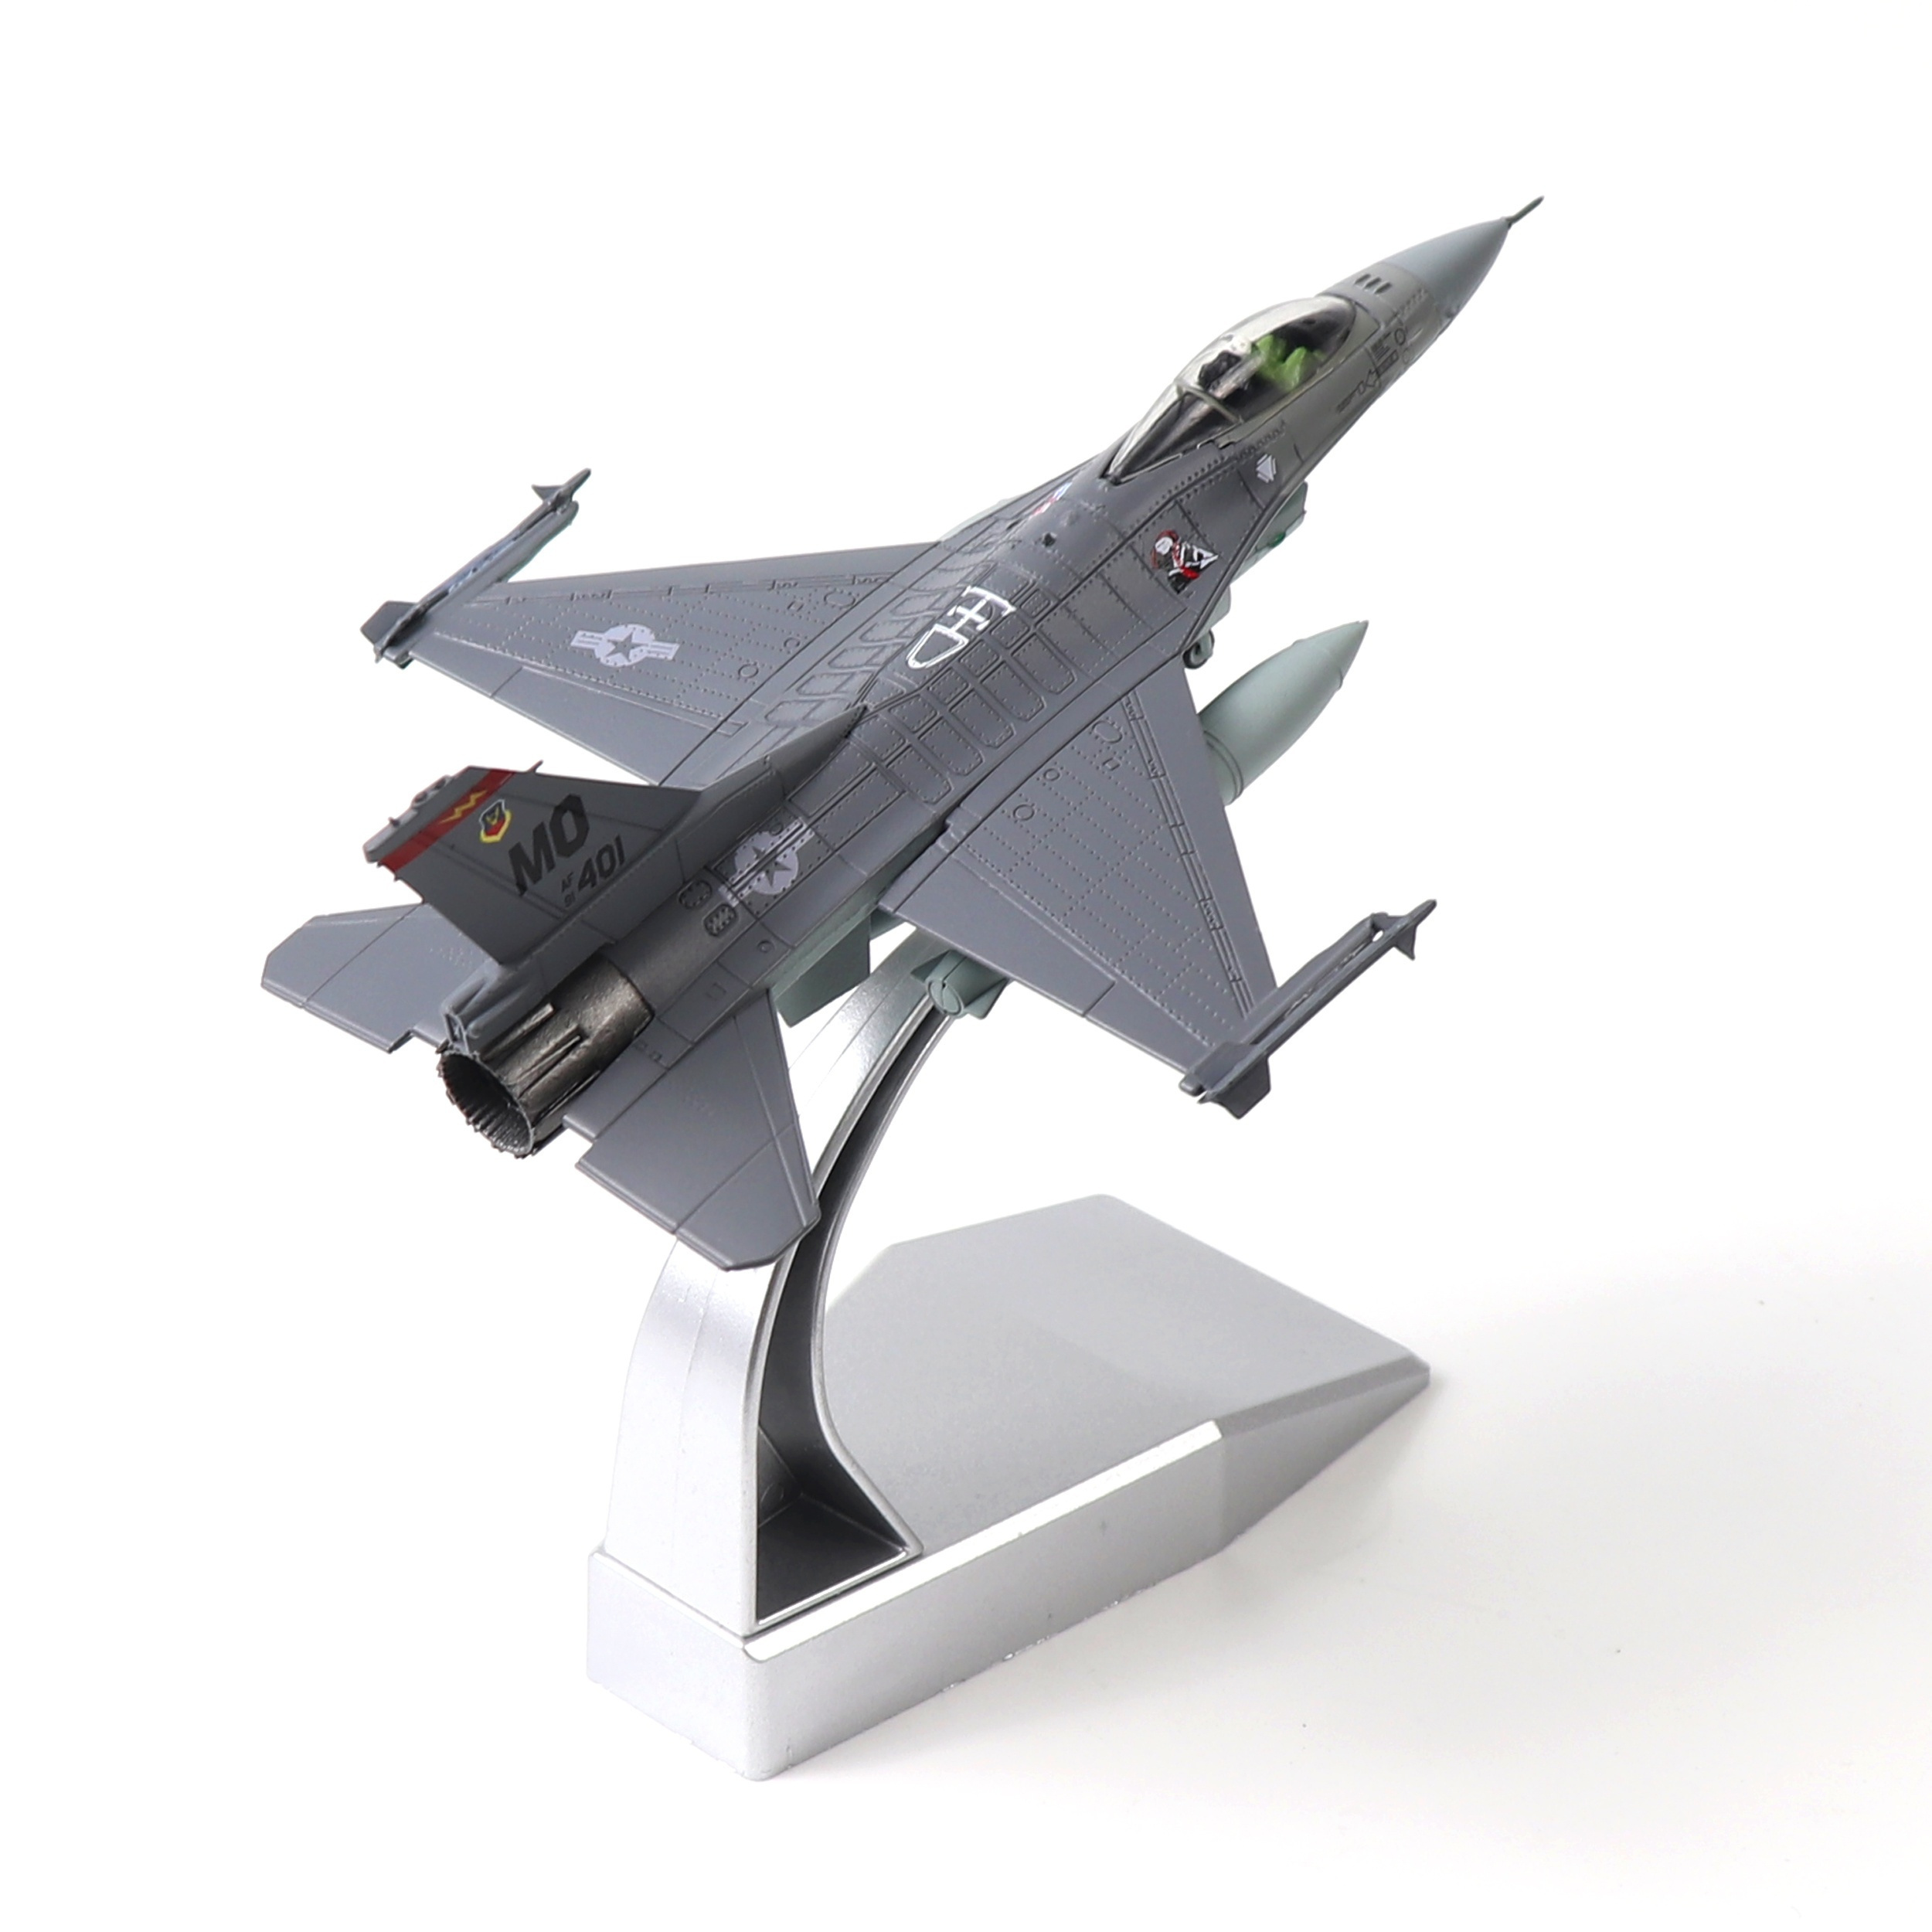 

1:100 Scale F-16c Fighting Falcon Diecast Metal Fighter Jet Model - Perfect For Collection And Gift Giving!